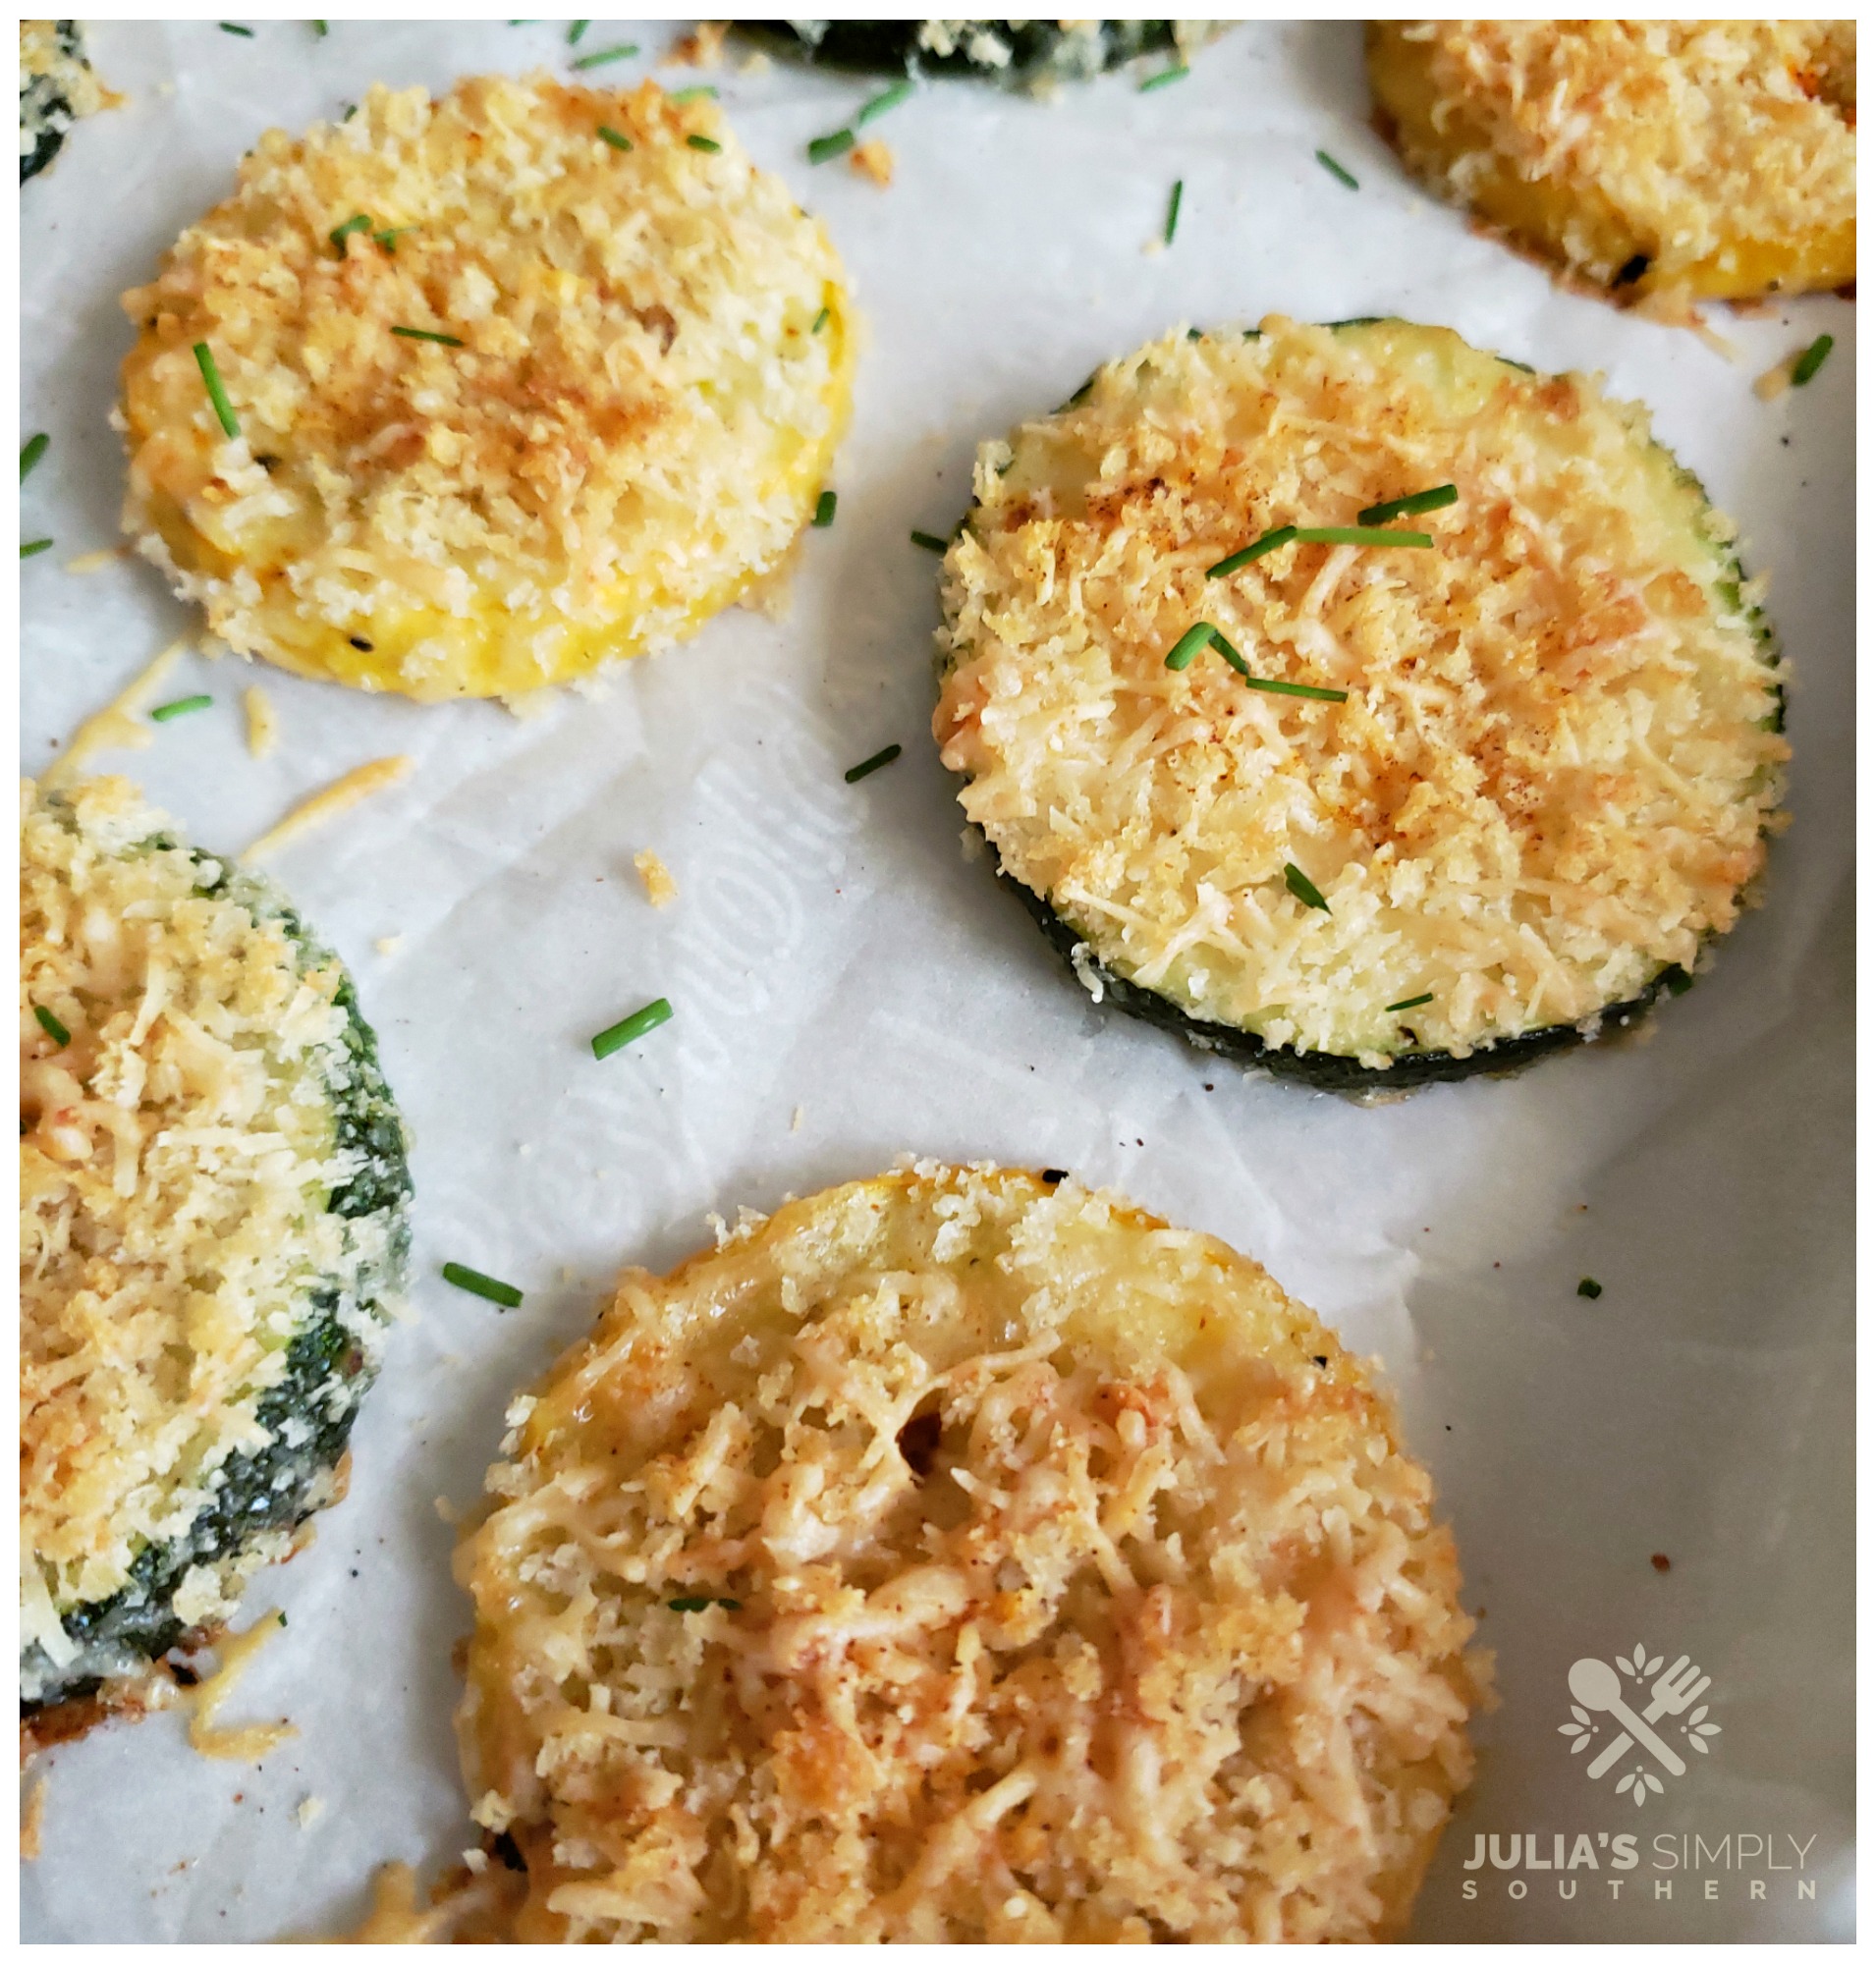 Delicious side dish recipes that kids love - yellow squash and zucchini with cheese toasted crispy.